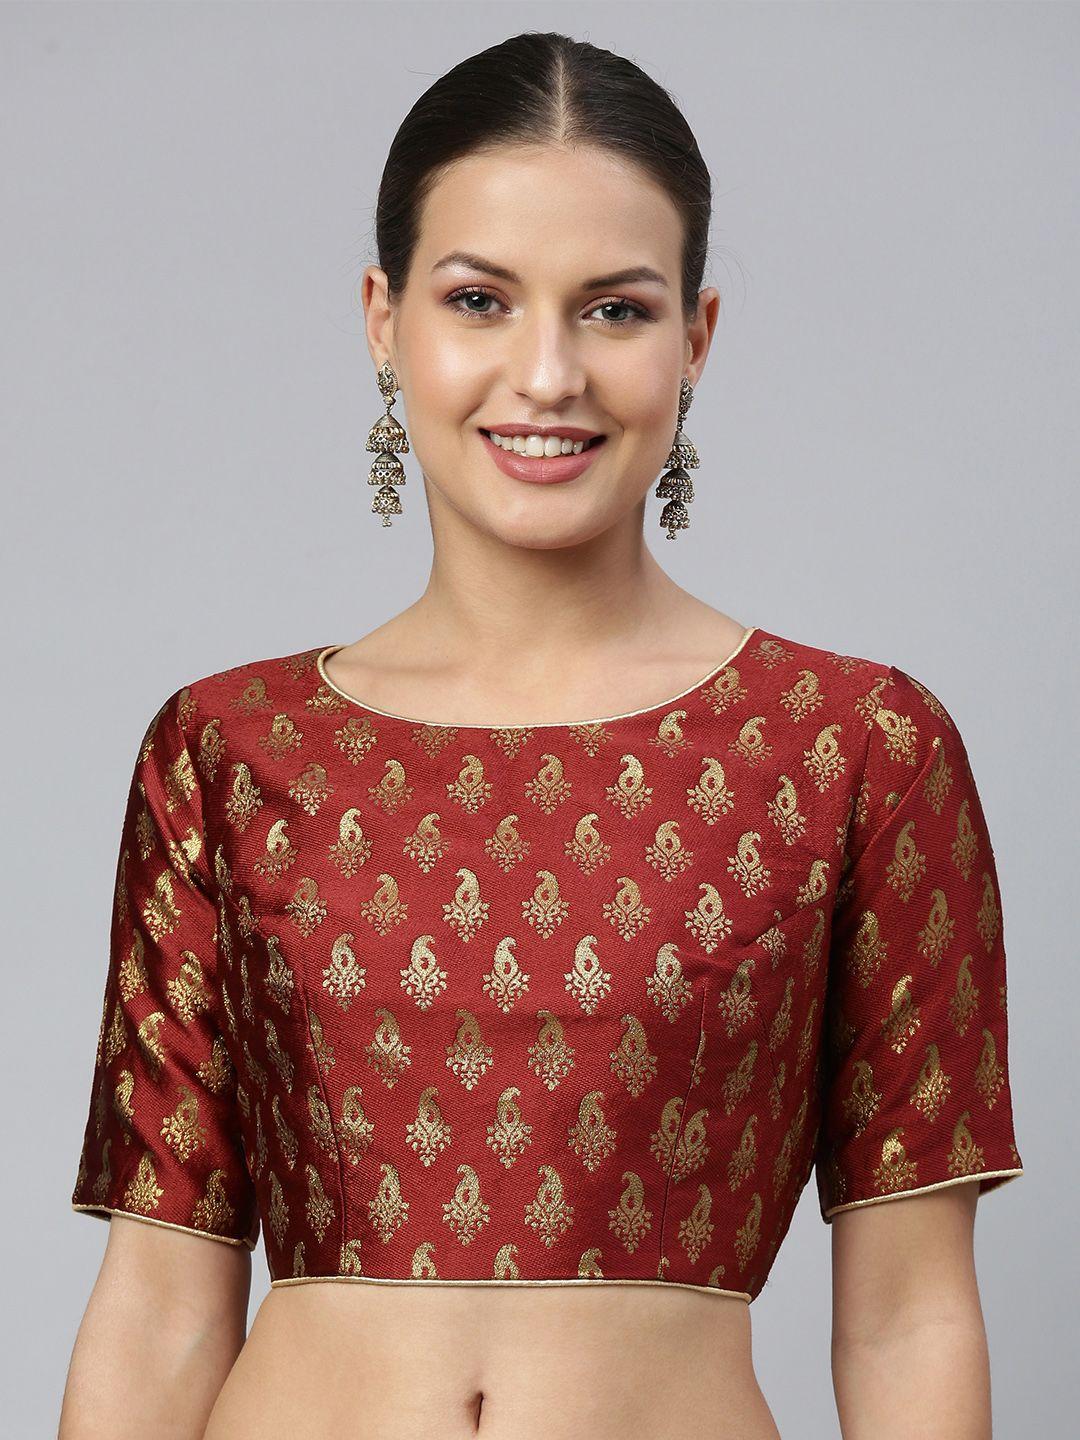 flaher women maroon & gold ethnic motifs jacquard woven design saree blouse with tie-ups